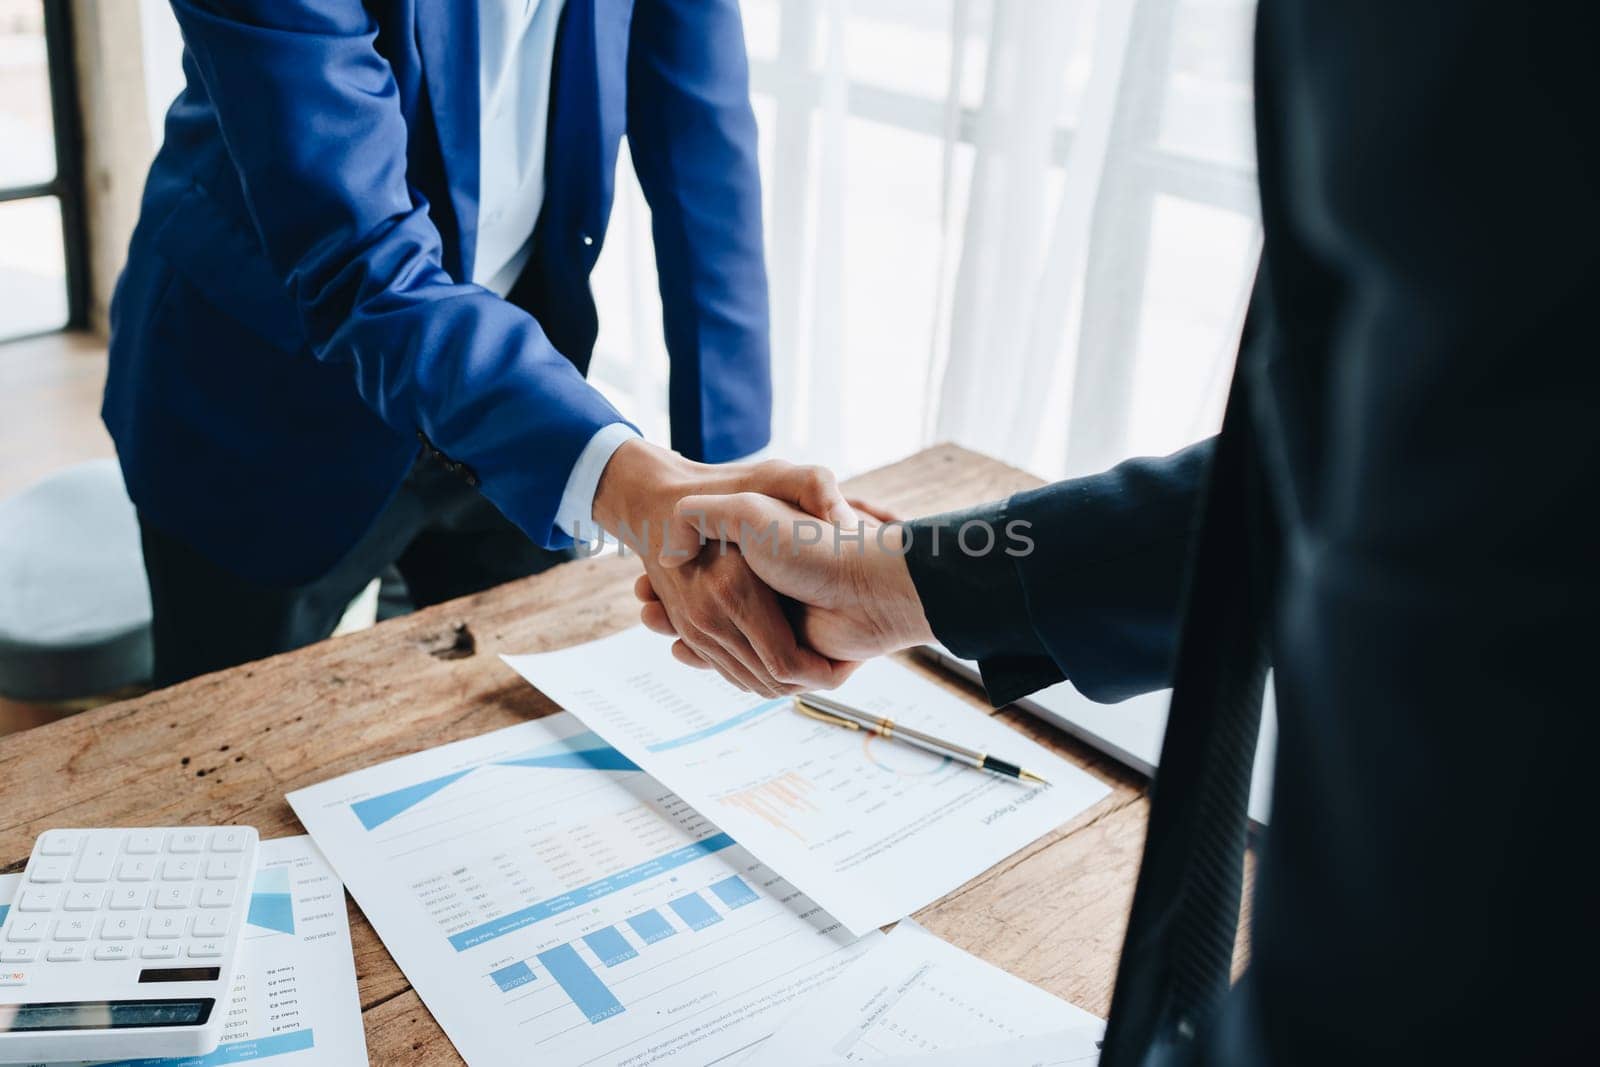 Young businesswoman collaborate with partners to increase their business investment network for Plans to improve quality next month in their office. agreement concept. by Manastrong